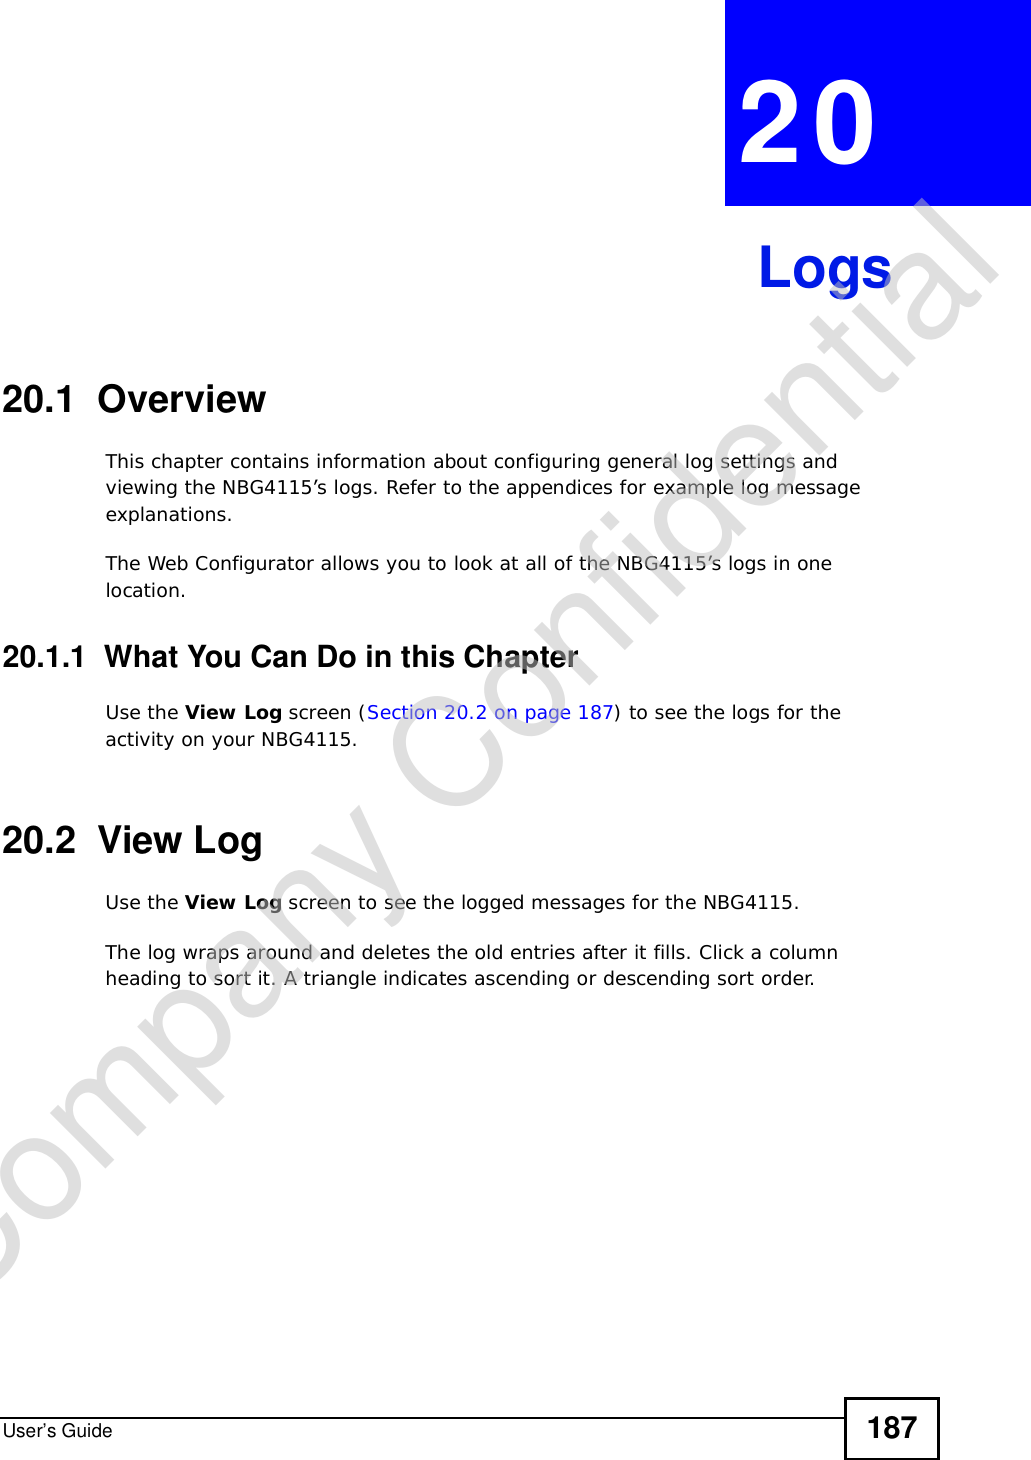 User’s Guide 187CHAPTER 20Logs20.1  OverviewThis chapter contains information about configuring general log settings and viewing the NBG4115’s logs. Refer to the appendices for example log message explanations. The Web Configurator allows you to look at all of the NBG4115’s logs in one location. 20.1.1  What You Can Do in this ChapterUse the View Log screen (Section 20.2 on page 187) to see the logs for the activity on your NBG4115.20.2  View LogUse the View Log screen to see the logged messages for the NBG4115.The log wraps around and deletes the old entries after it fills. Click a column heading to sort it. A triangle indicates ascending or descending sort order. Company Confidential